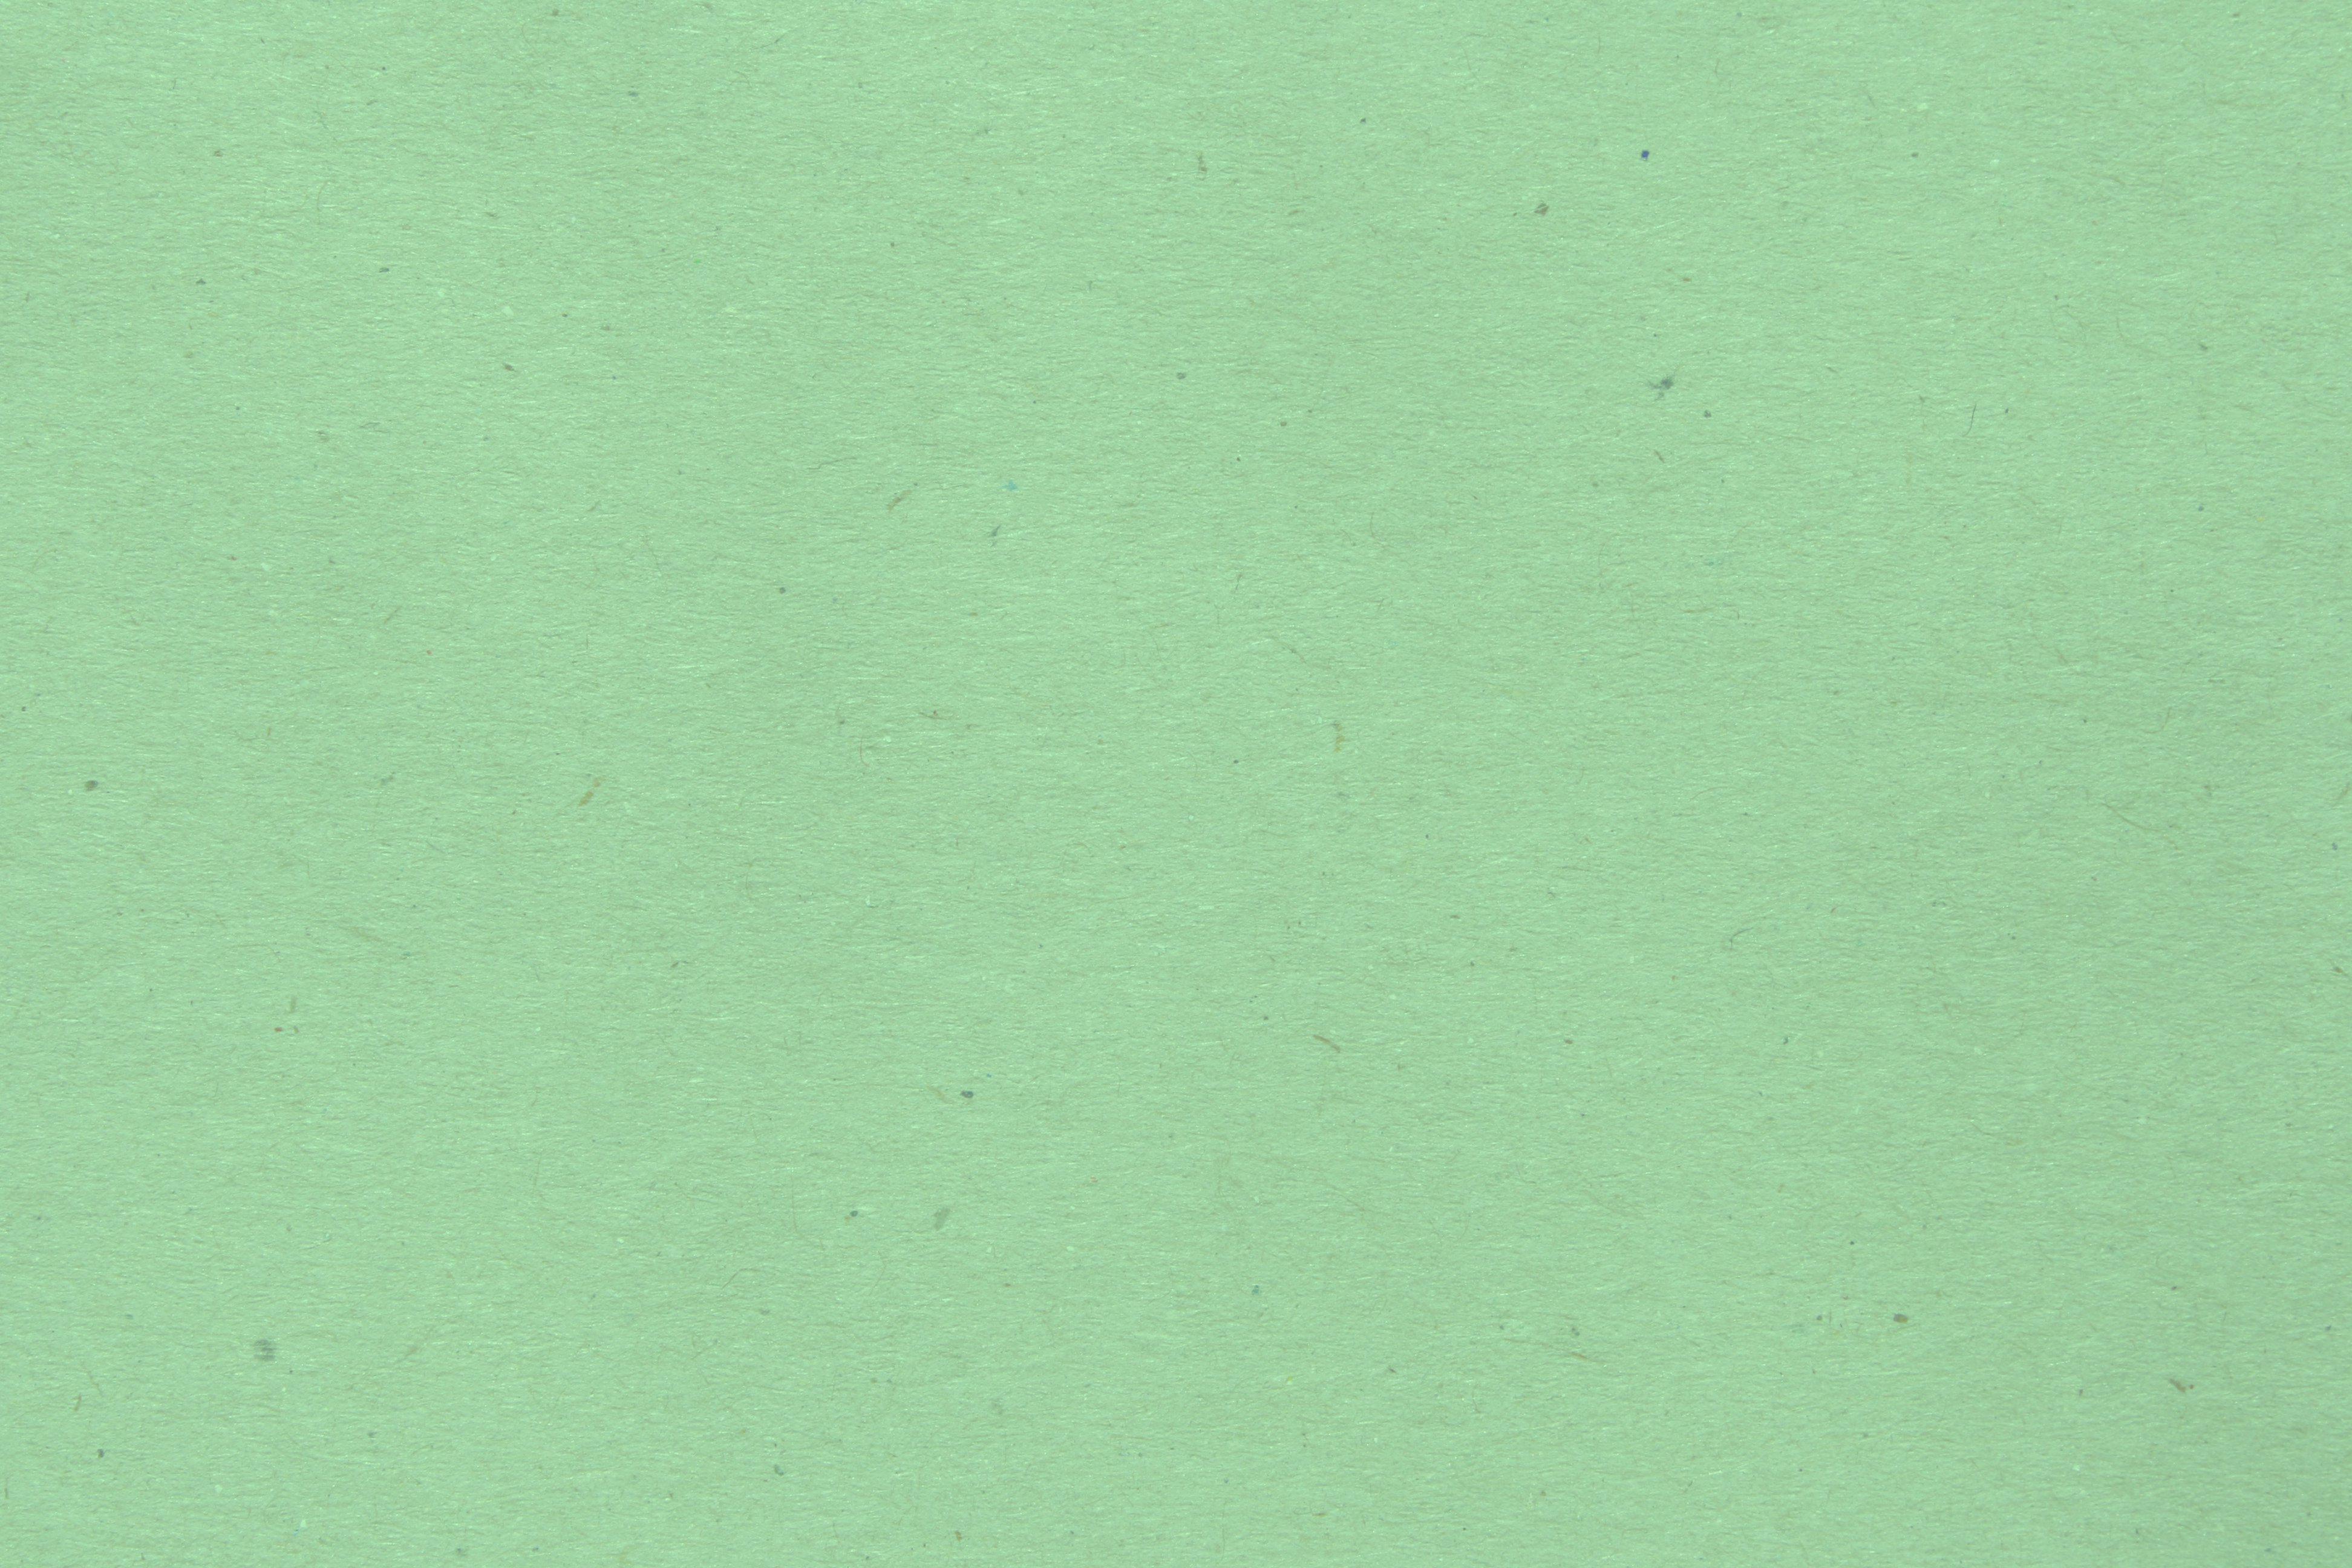 Mint Green Paper Texture High Resolution Photo Dimensions